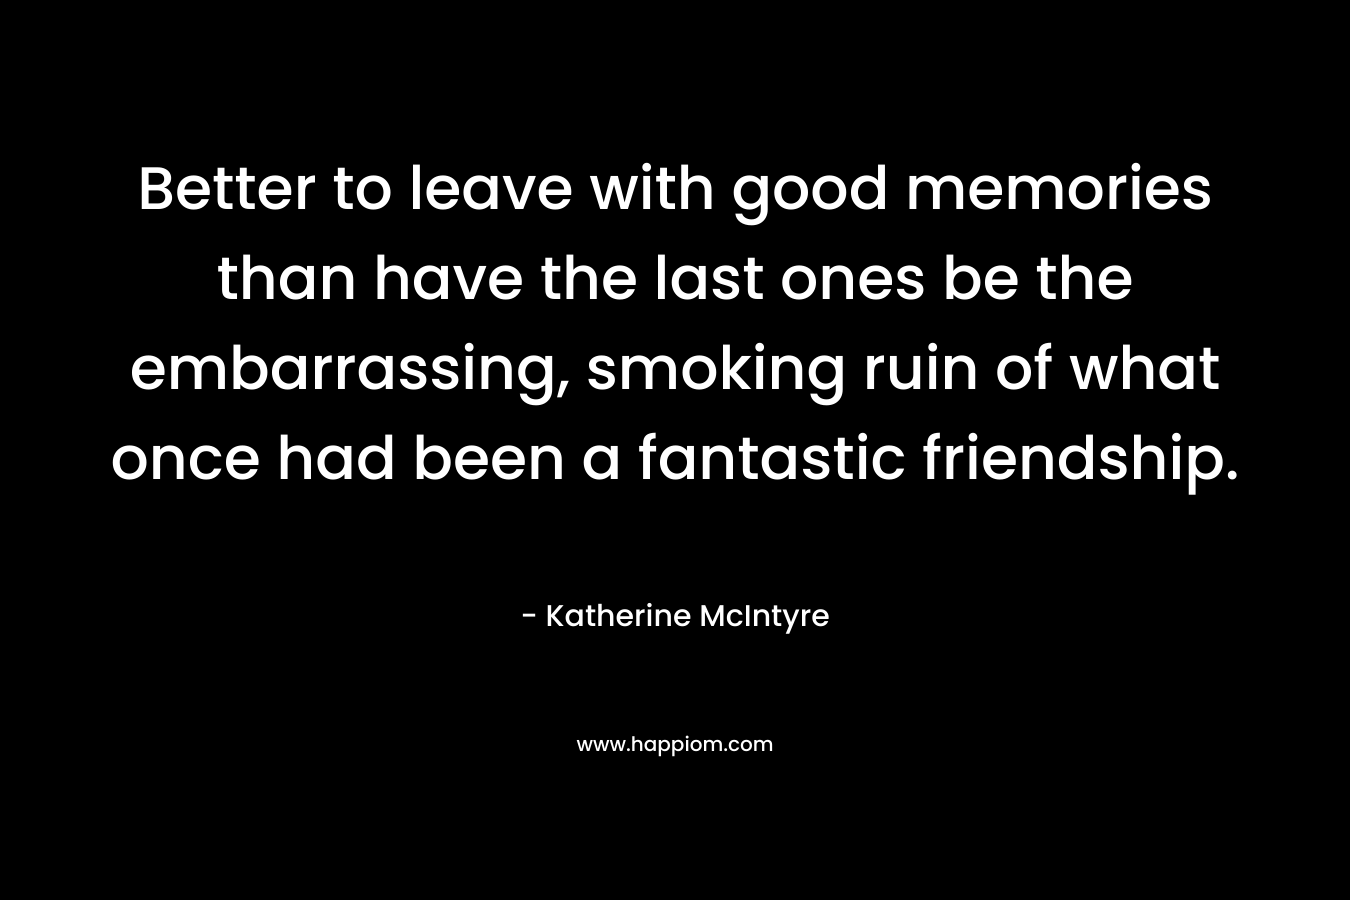 Better to leave with good memories than have the last ones be the embarrassing, smoking ruin of what once had been a fantastic friendship.